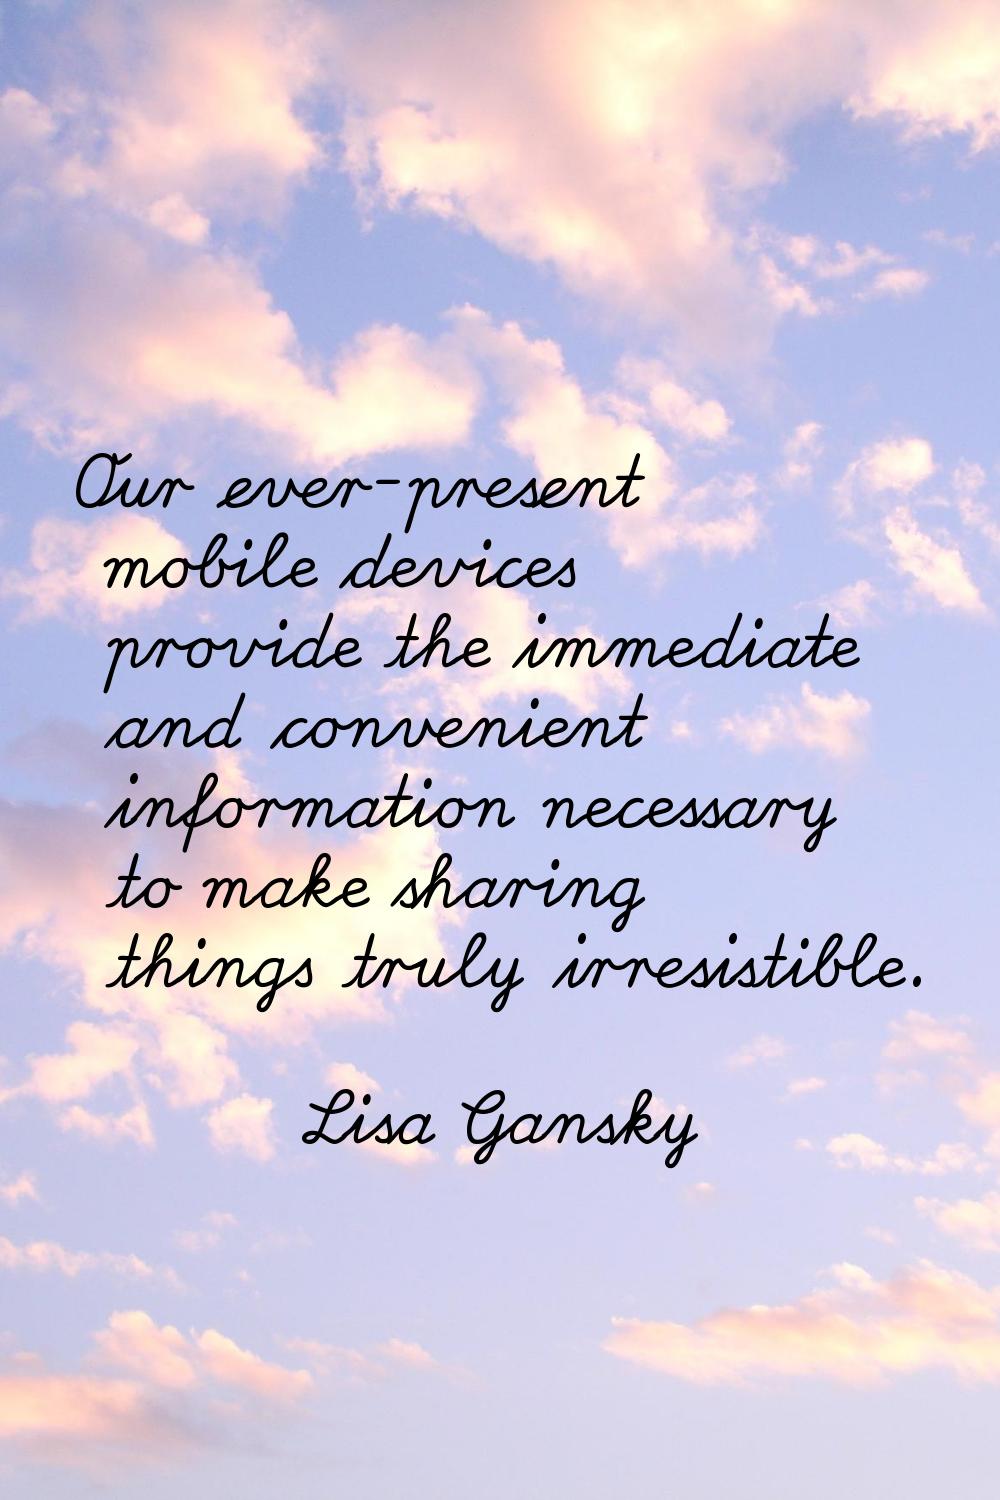 Our ever-present mobile devices provide the immediate and convenient information necessary to make 